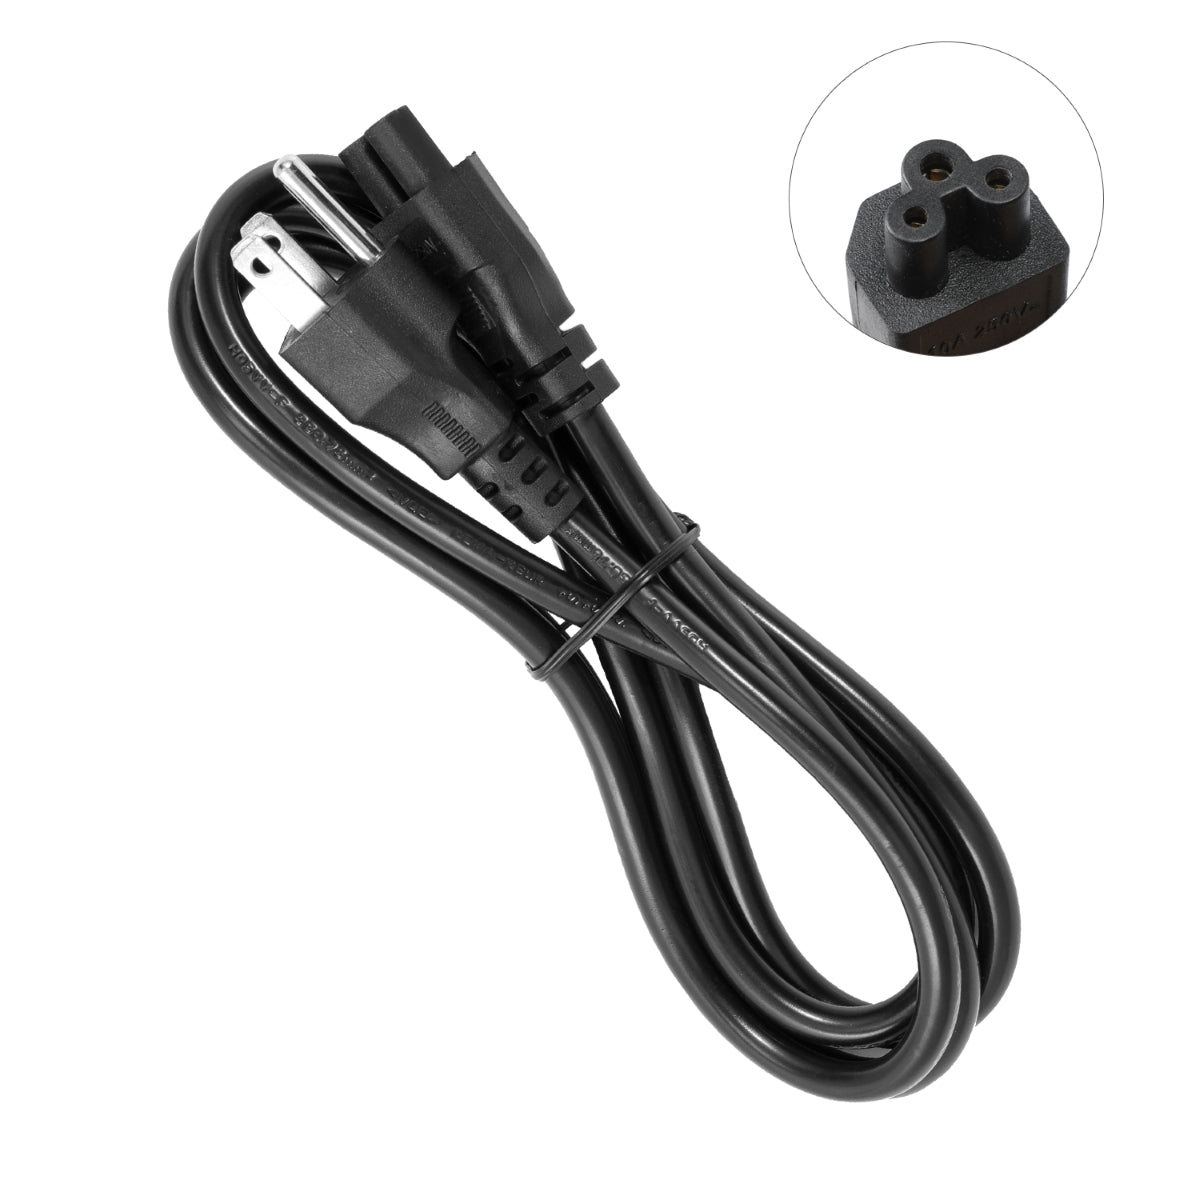 Power Cord for LG 55LN5400 Monitor.